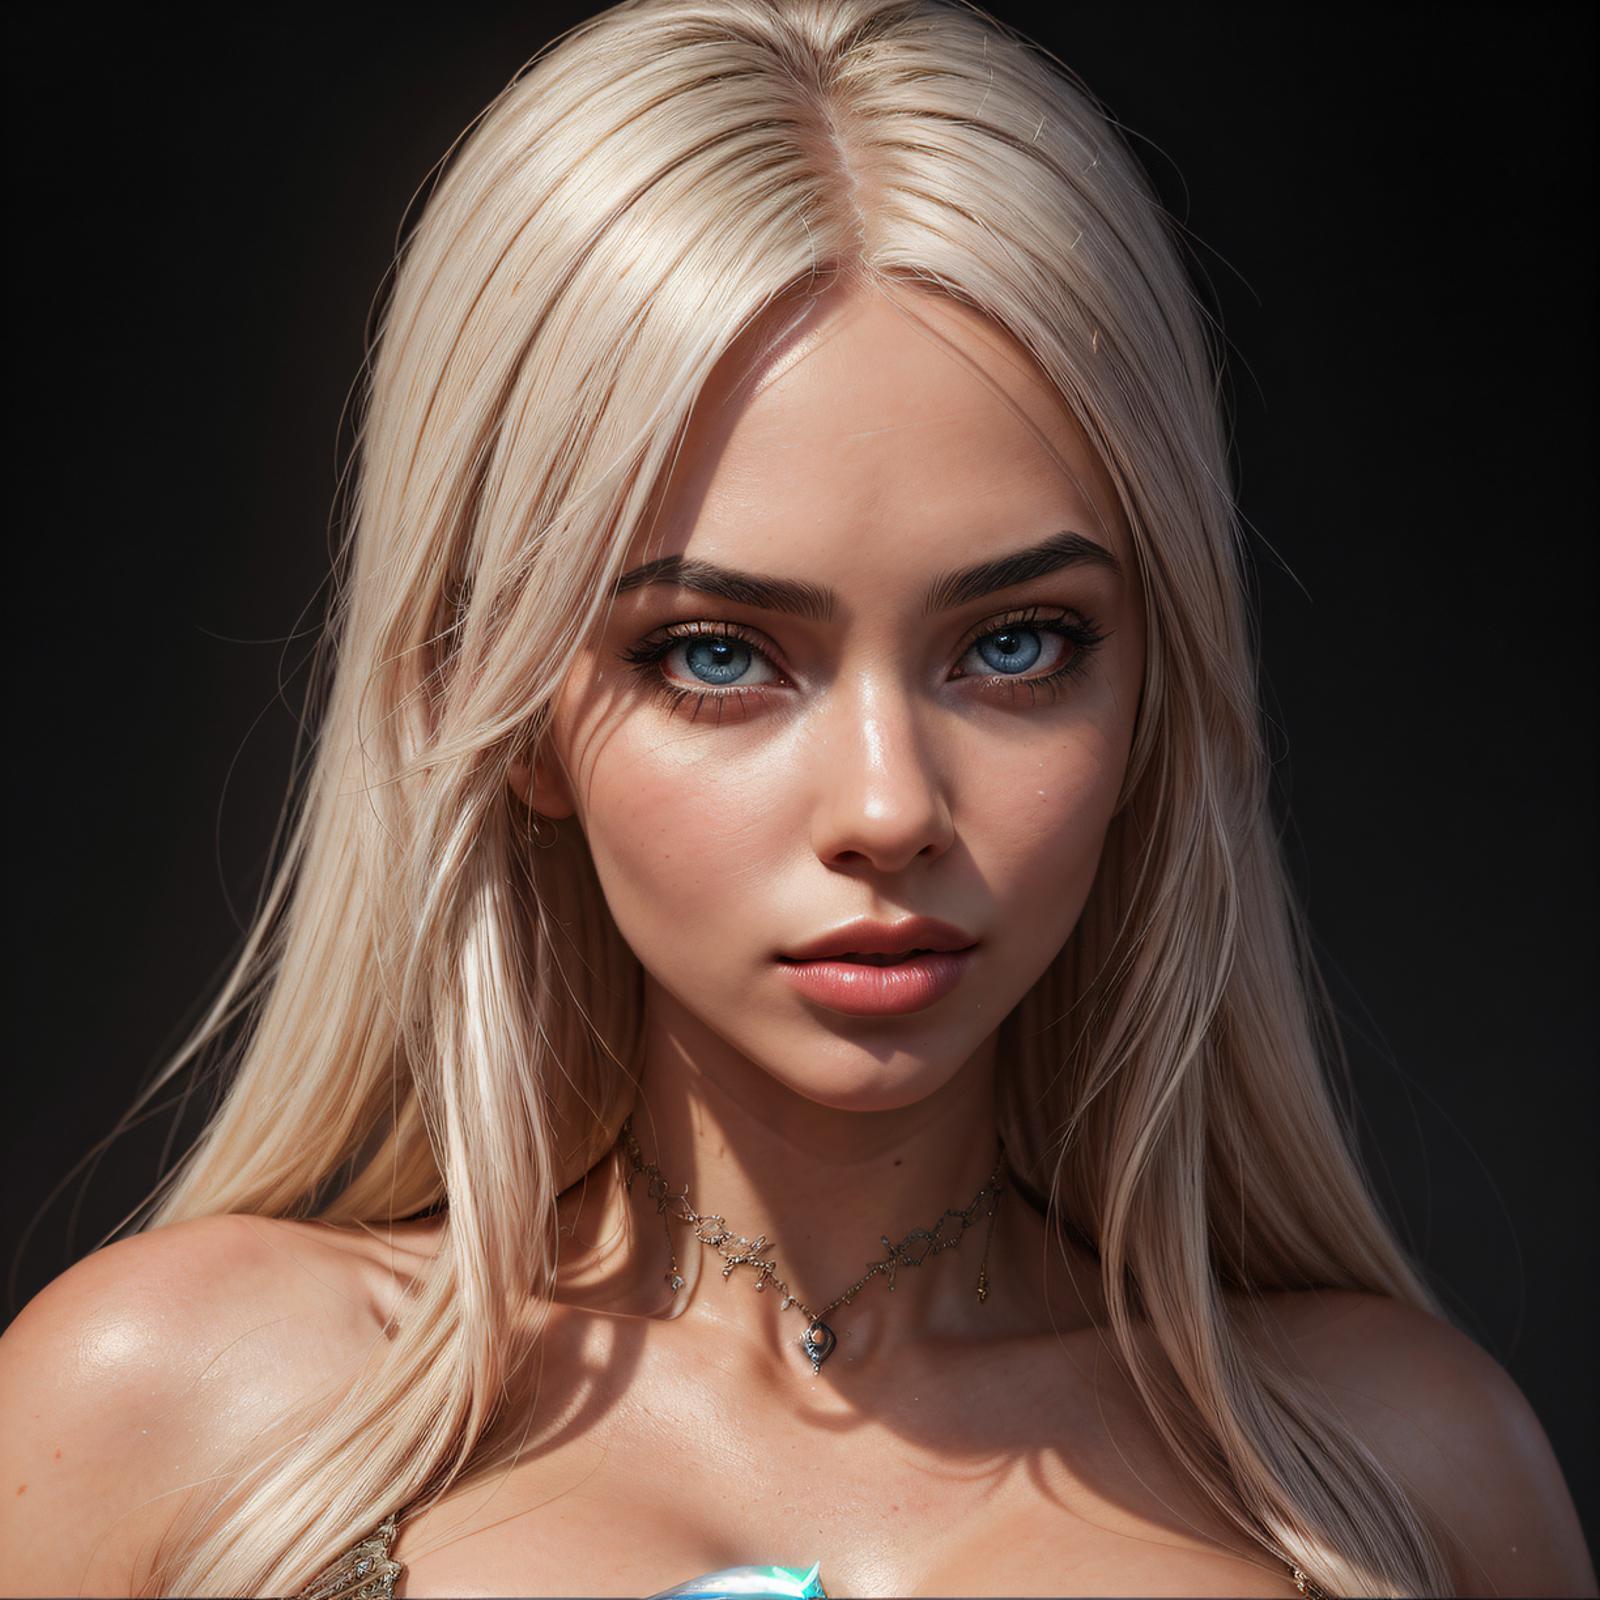 AI model image by SwampGassed